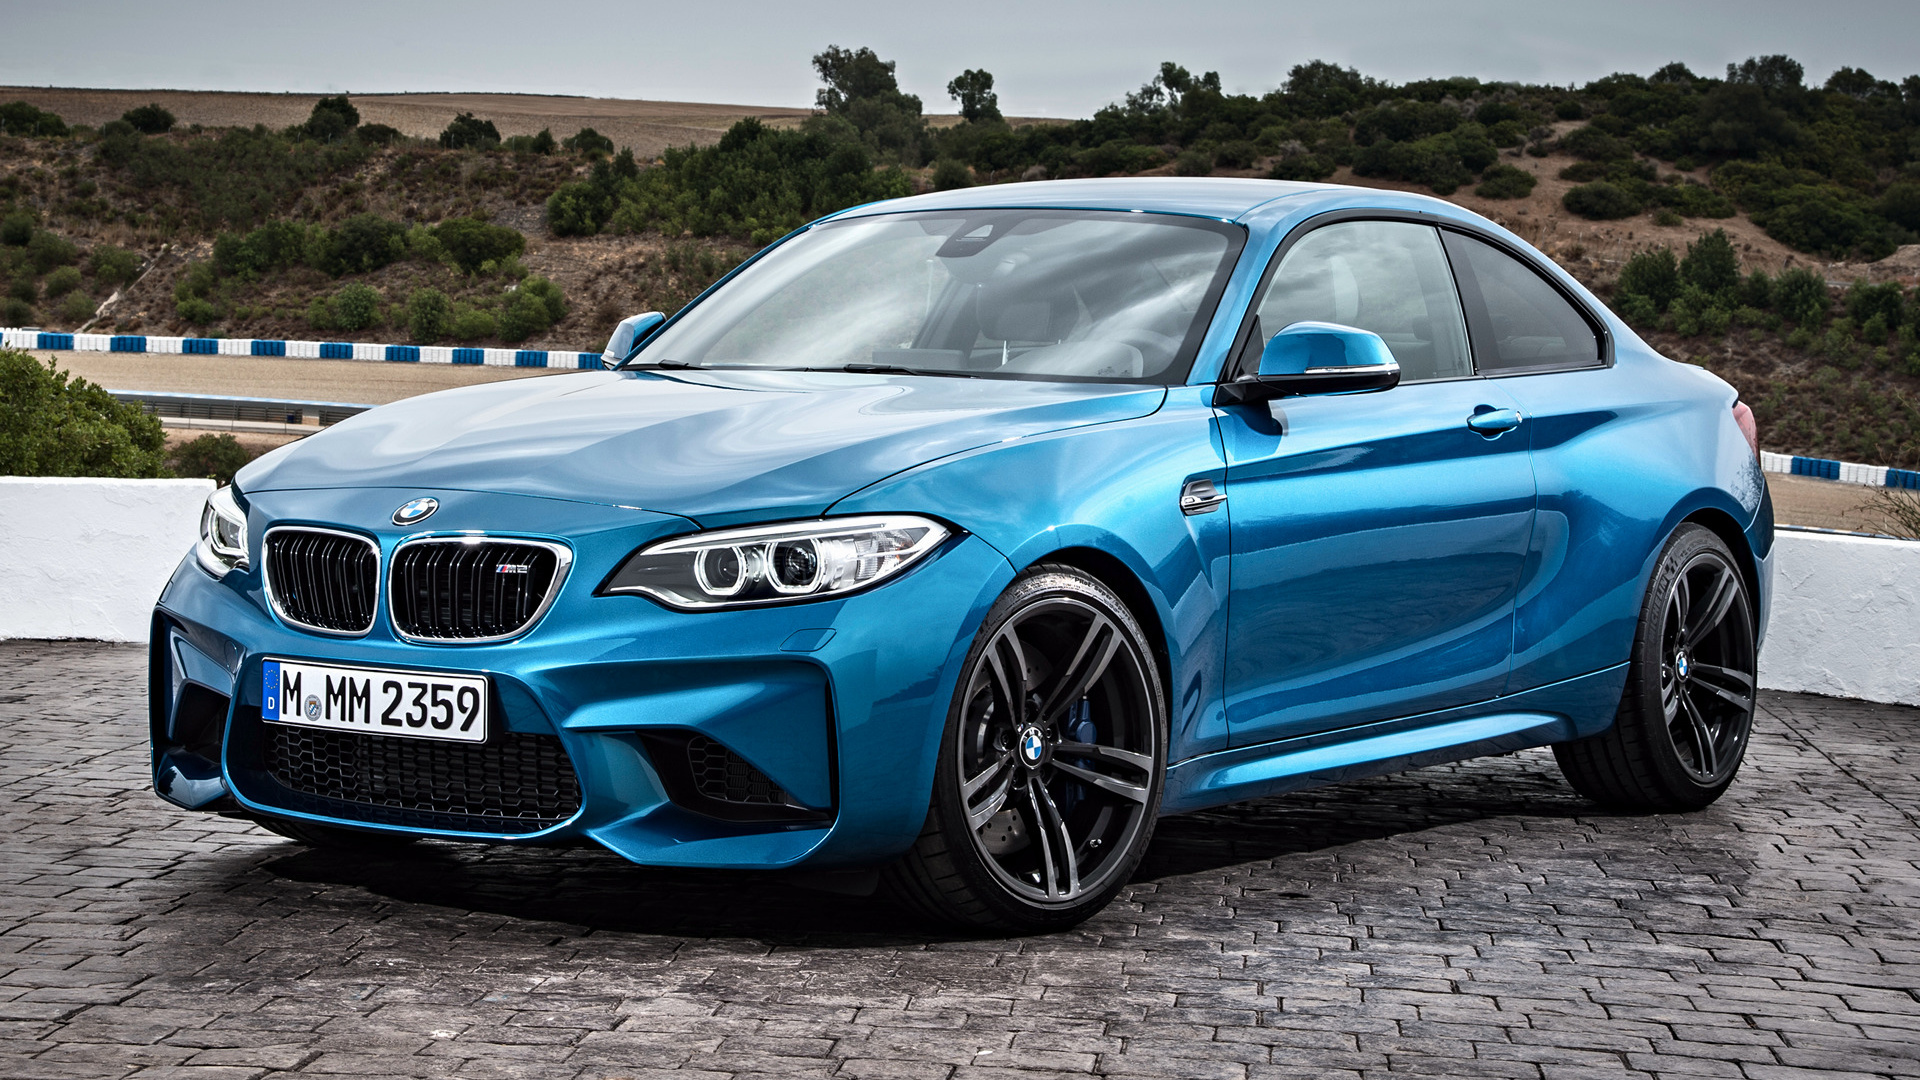 BMW M2 Coupe 2015 Wallpapers and HD Images   Car Pixel